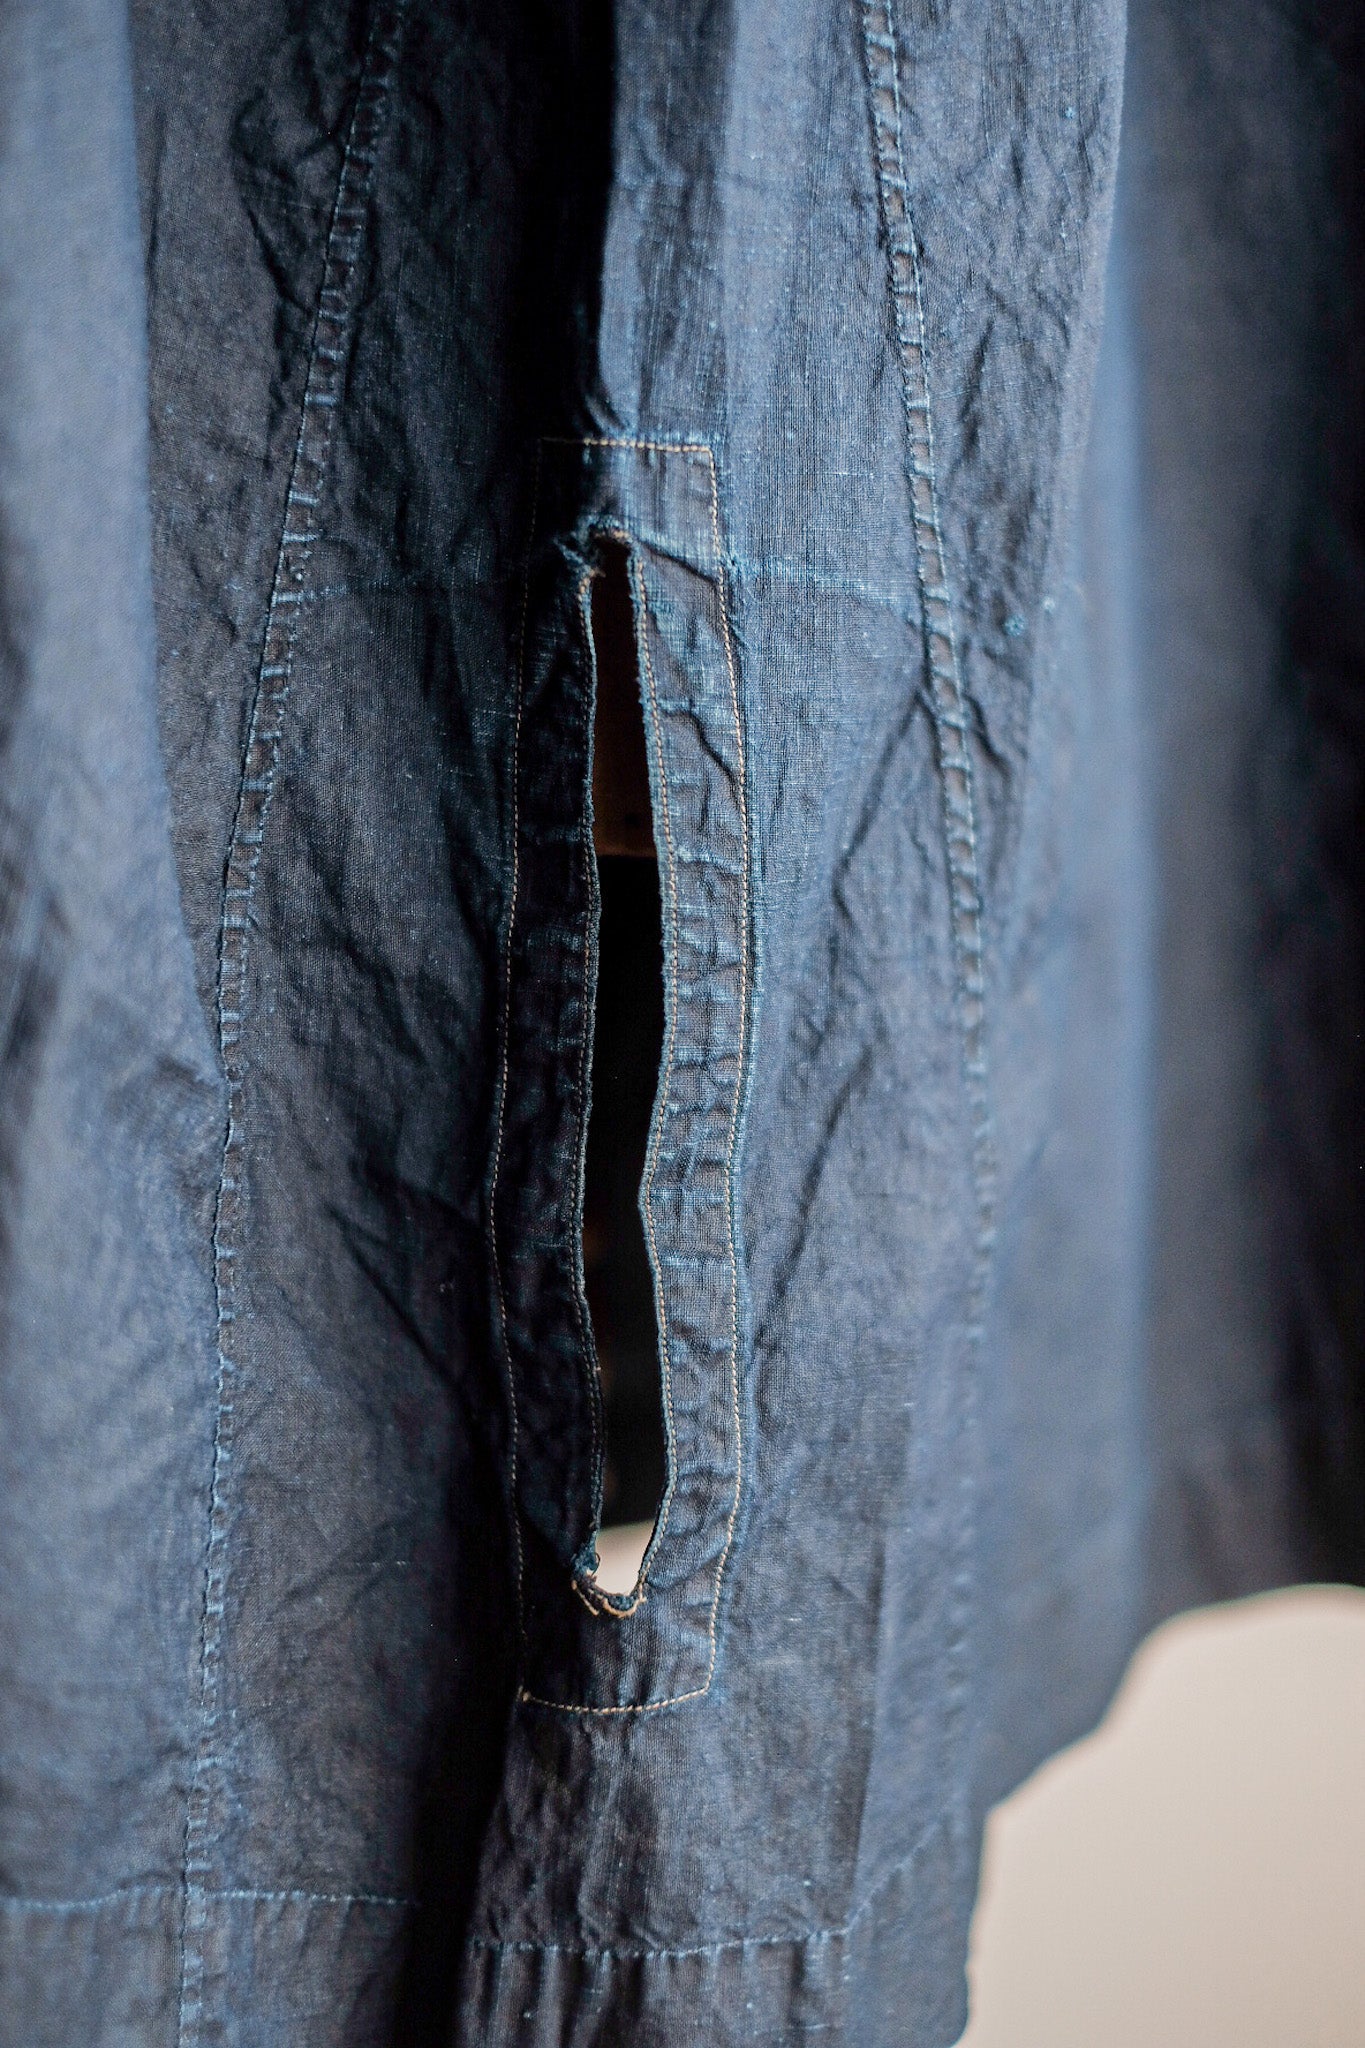 【Early 20th C】French Antique Indigo Linen Smock 